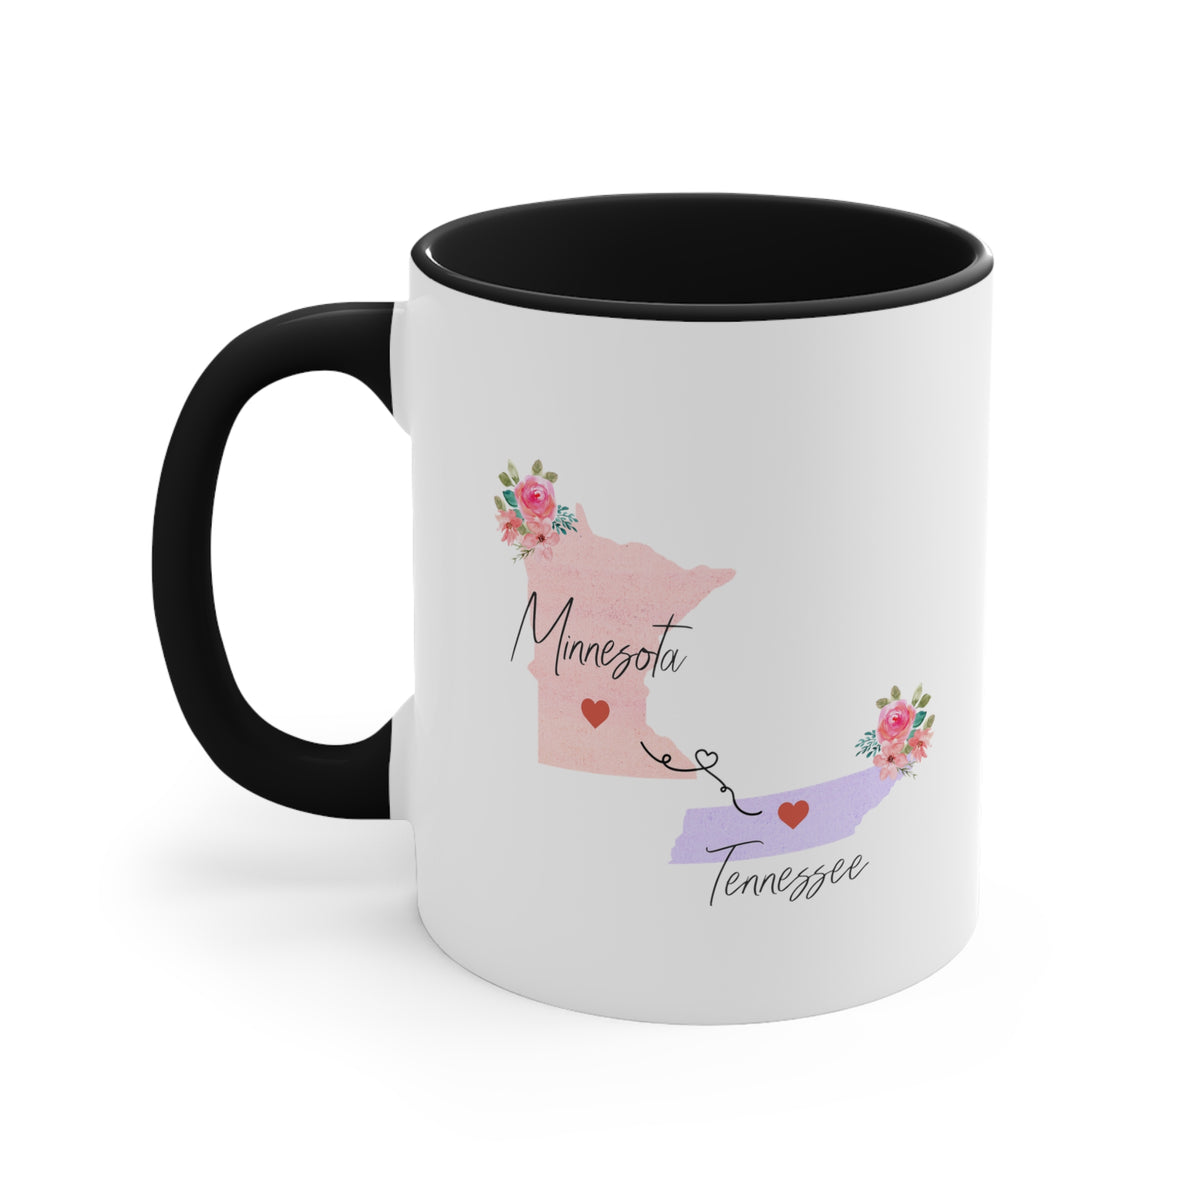 Minnesota Tennessee Gifts | Long Distance State Two Tone Coffee Mug | State to State | Away From Hometown Family | Moving Away Gift